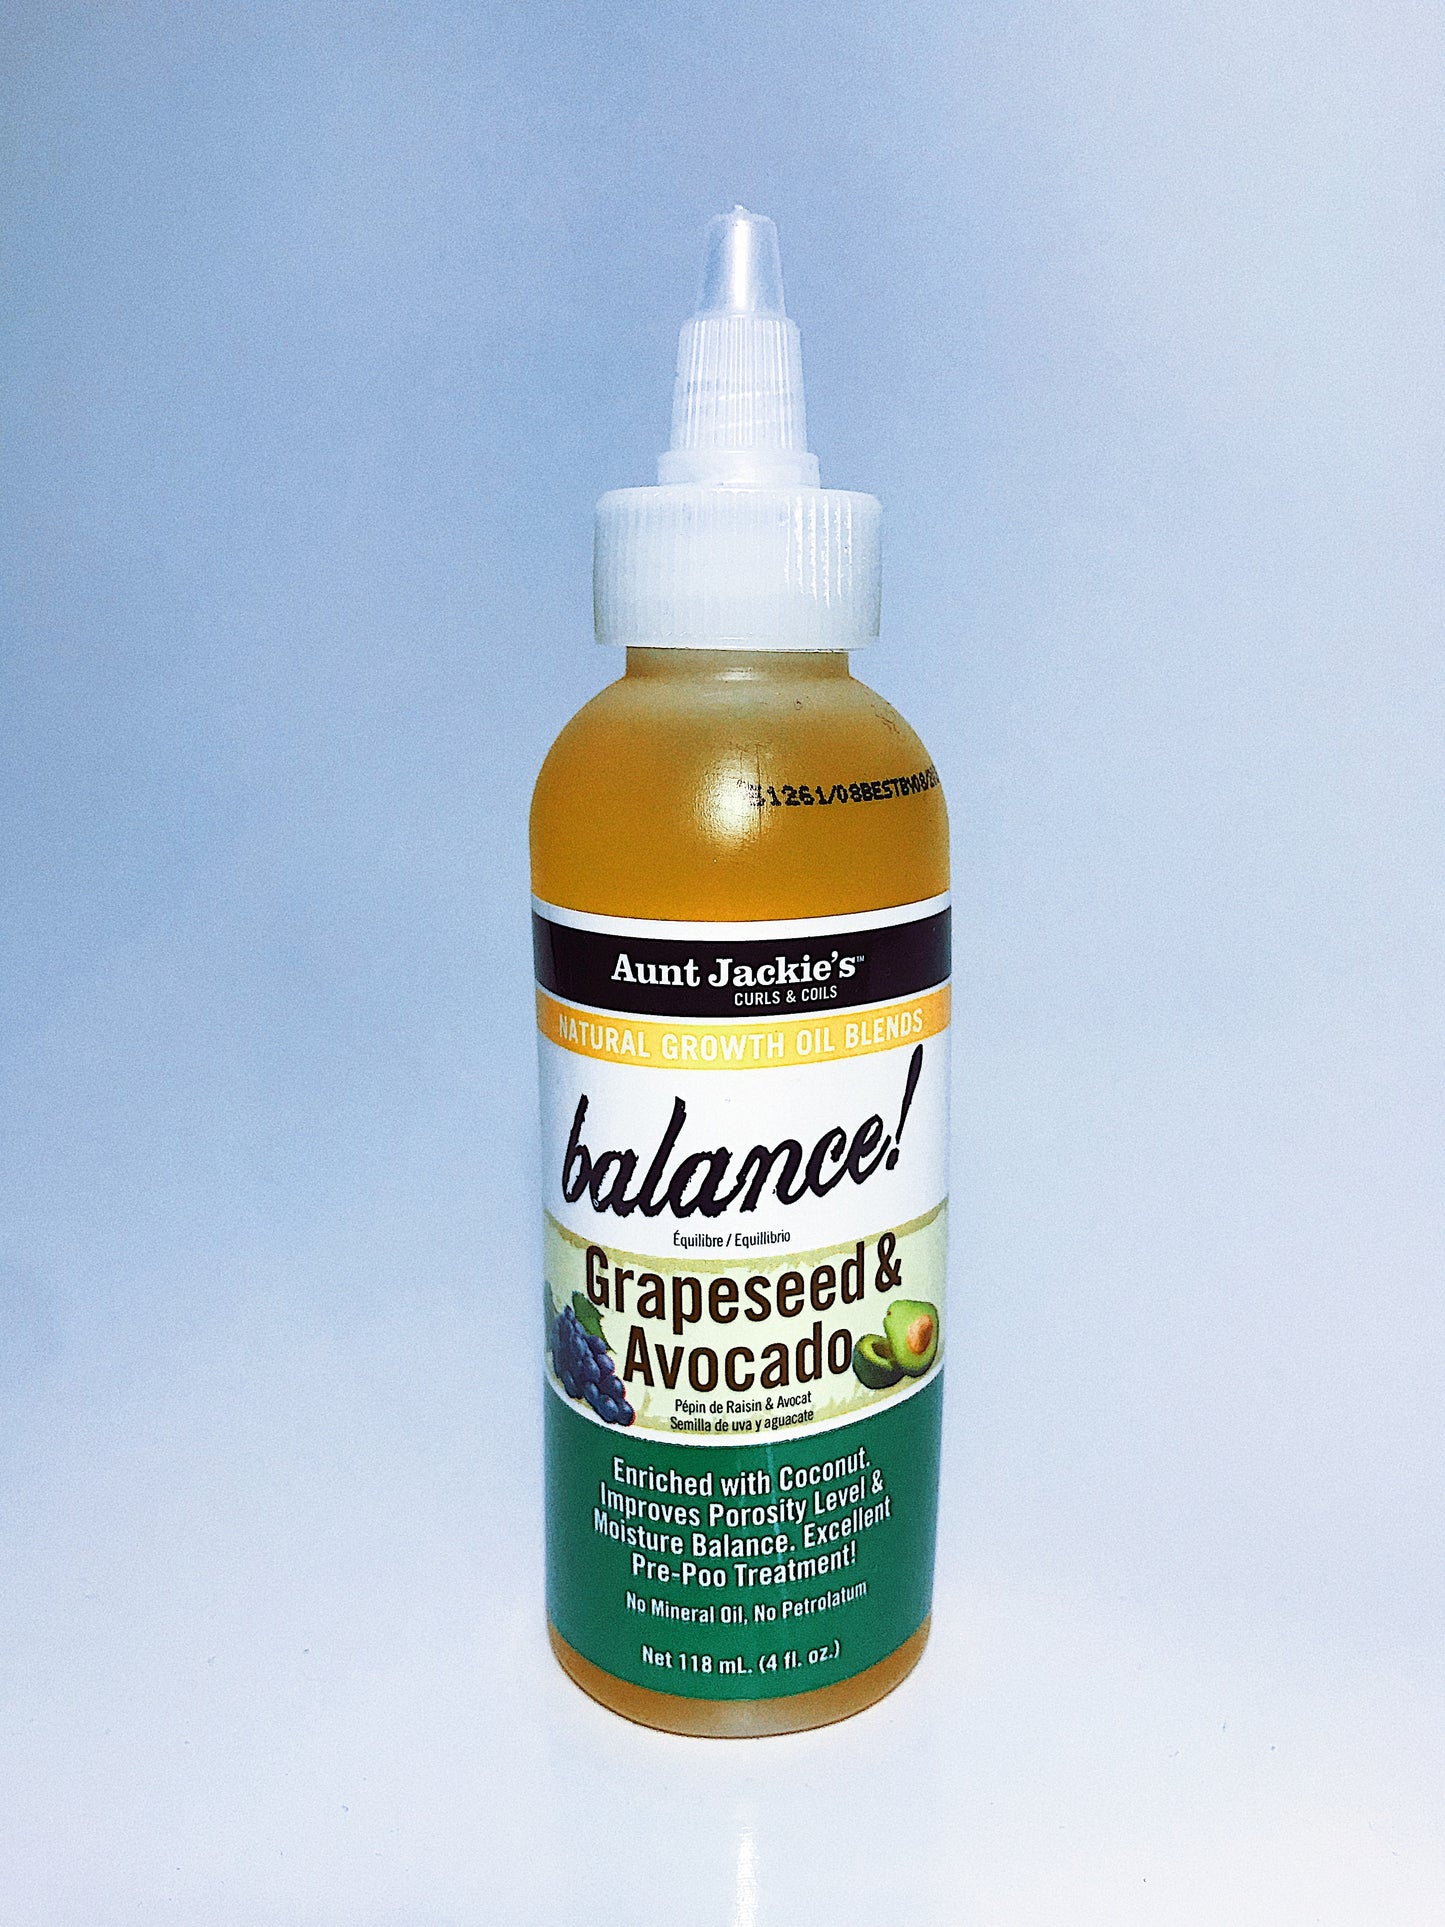 Aunt Jackie’s Balance! Grapeseed & Avocado Oil